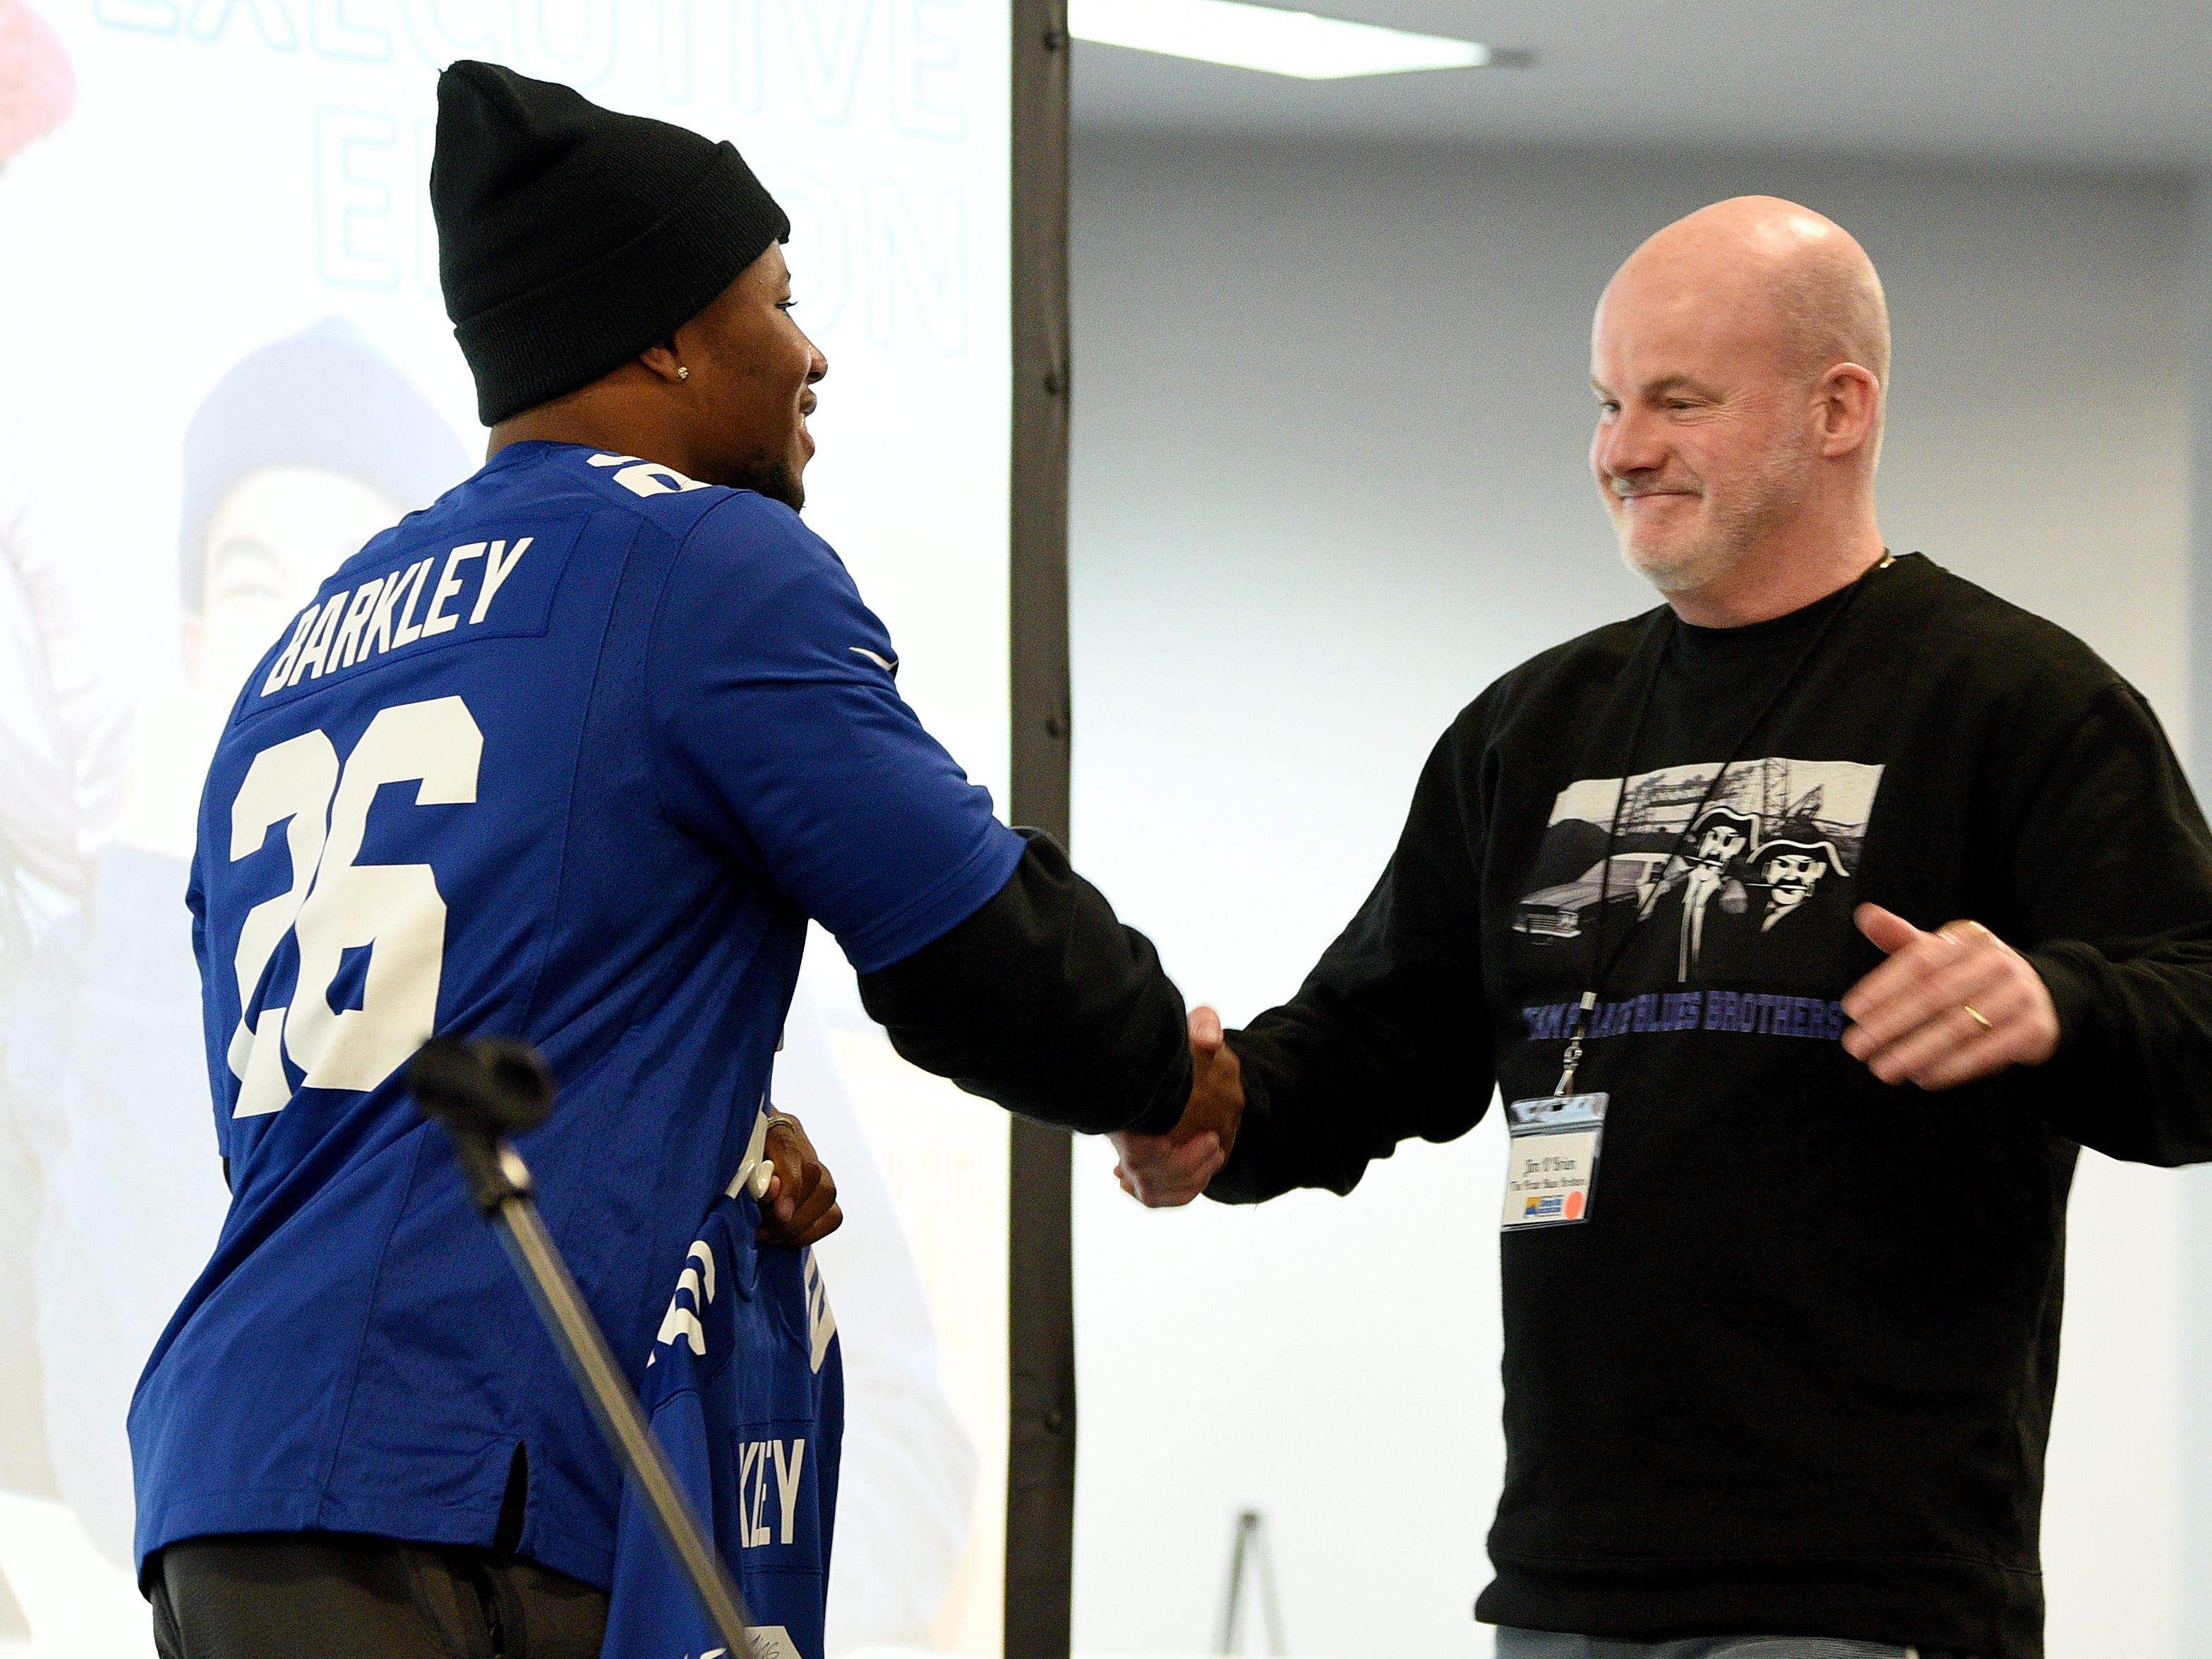 Covenant House holds a Sleep Out Executive Edition in Newark on Thursday November 21, 2019. Saquon Barkley a player with the Giants and Sleep Out: Executive Edition Chairman shakes the hand of the top fundraiser Jim O'Brien.